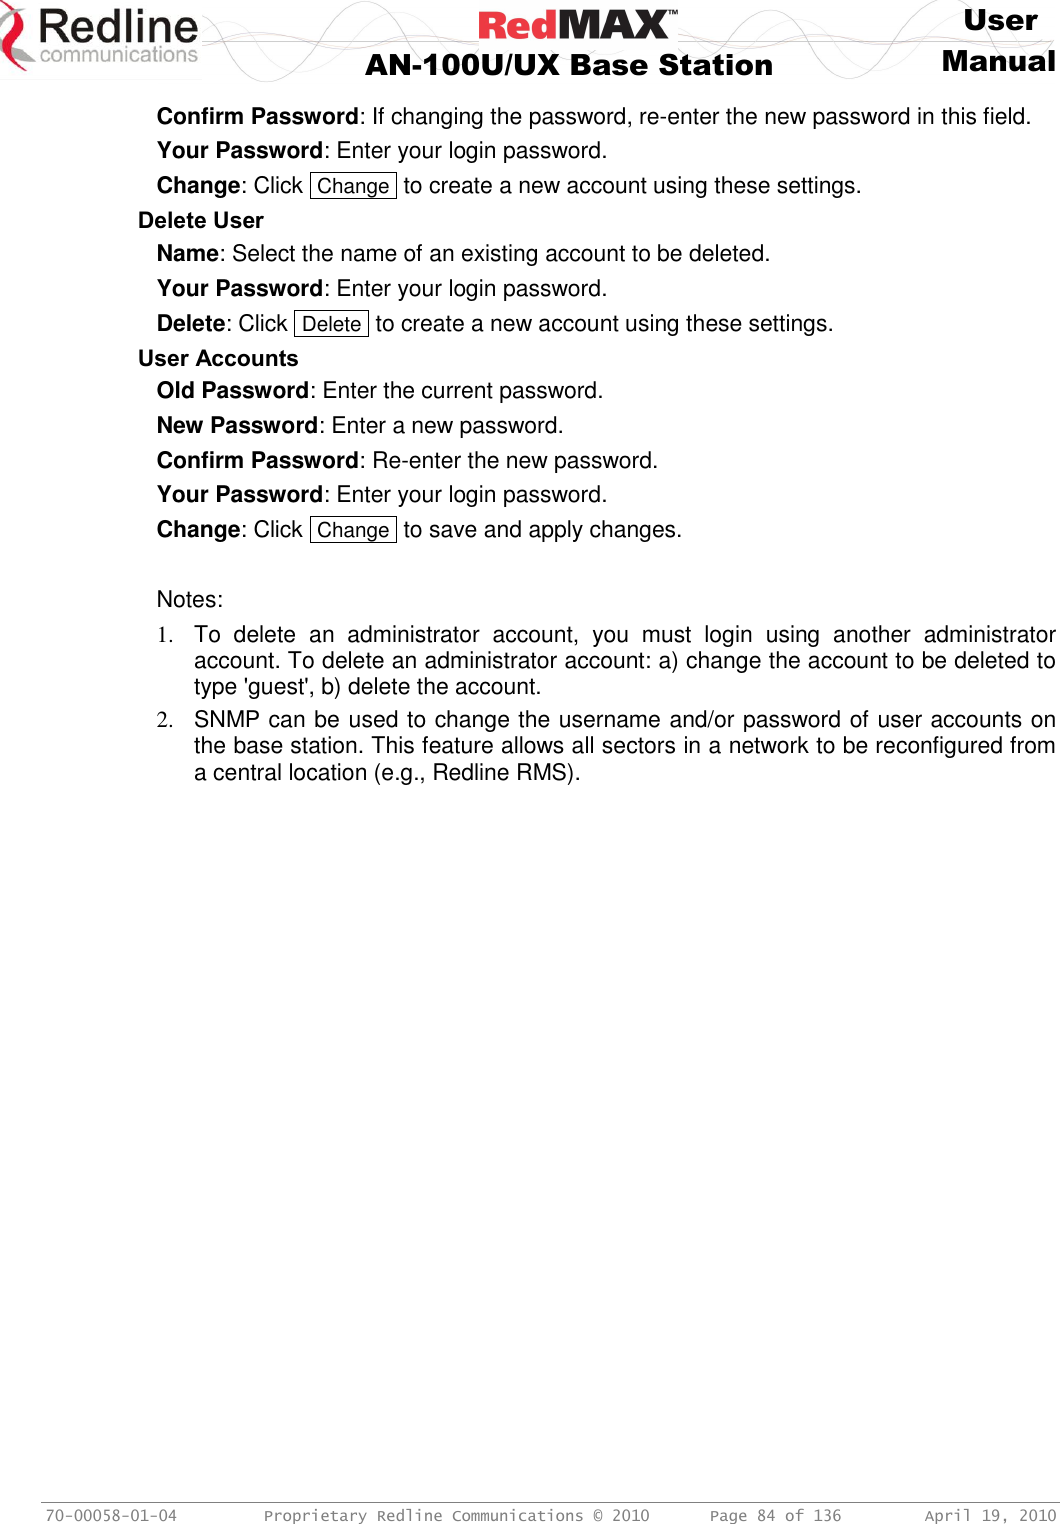     User  AN-100U/UX Base Station Manual   70-00058-01-04  Proprietary Redline Communications © 2010   Page 84 of 136  April 19, 2010 Confirm Password: If changing the password, re-enter the new password in this field. Your Password: Enter your login password. Change: Click  Change  to create a new account using these settings. Delete User Name: Select the name of an existing account to be deleted. Your Password: Enter your login password. Delete: Click  Delete  to create a new account using these settings. User Accounts Old Password: Enter the current password. New Password: Enter a new password. Confirm Password: Re-enter the new password. Your Password: Enter your login password. Change: Click  Change  to save and apply changes.  Notes: 1.  To  delete  an  administrator  account,  you  must  login  using  another  administrator account. To delete an administrator account: a) change the account to be deleted to type &apos;guest&apos;, b) delete the account. 2.  SNMP can be used to change the username and/or password of user accounts on the base station. This feature allows all sectors in a network to be reconfigured from a central location (e.g., Redline RMS). 